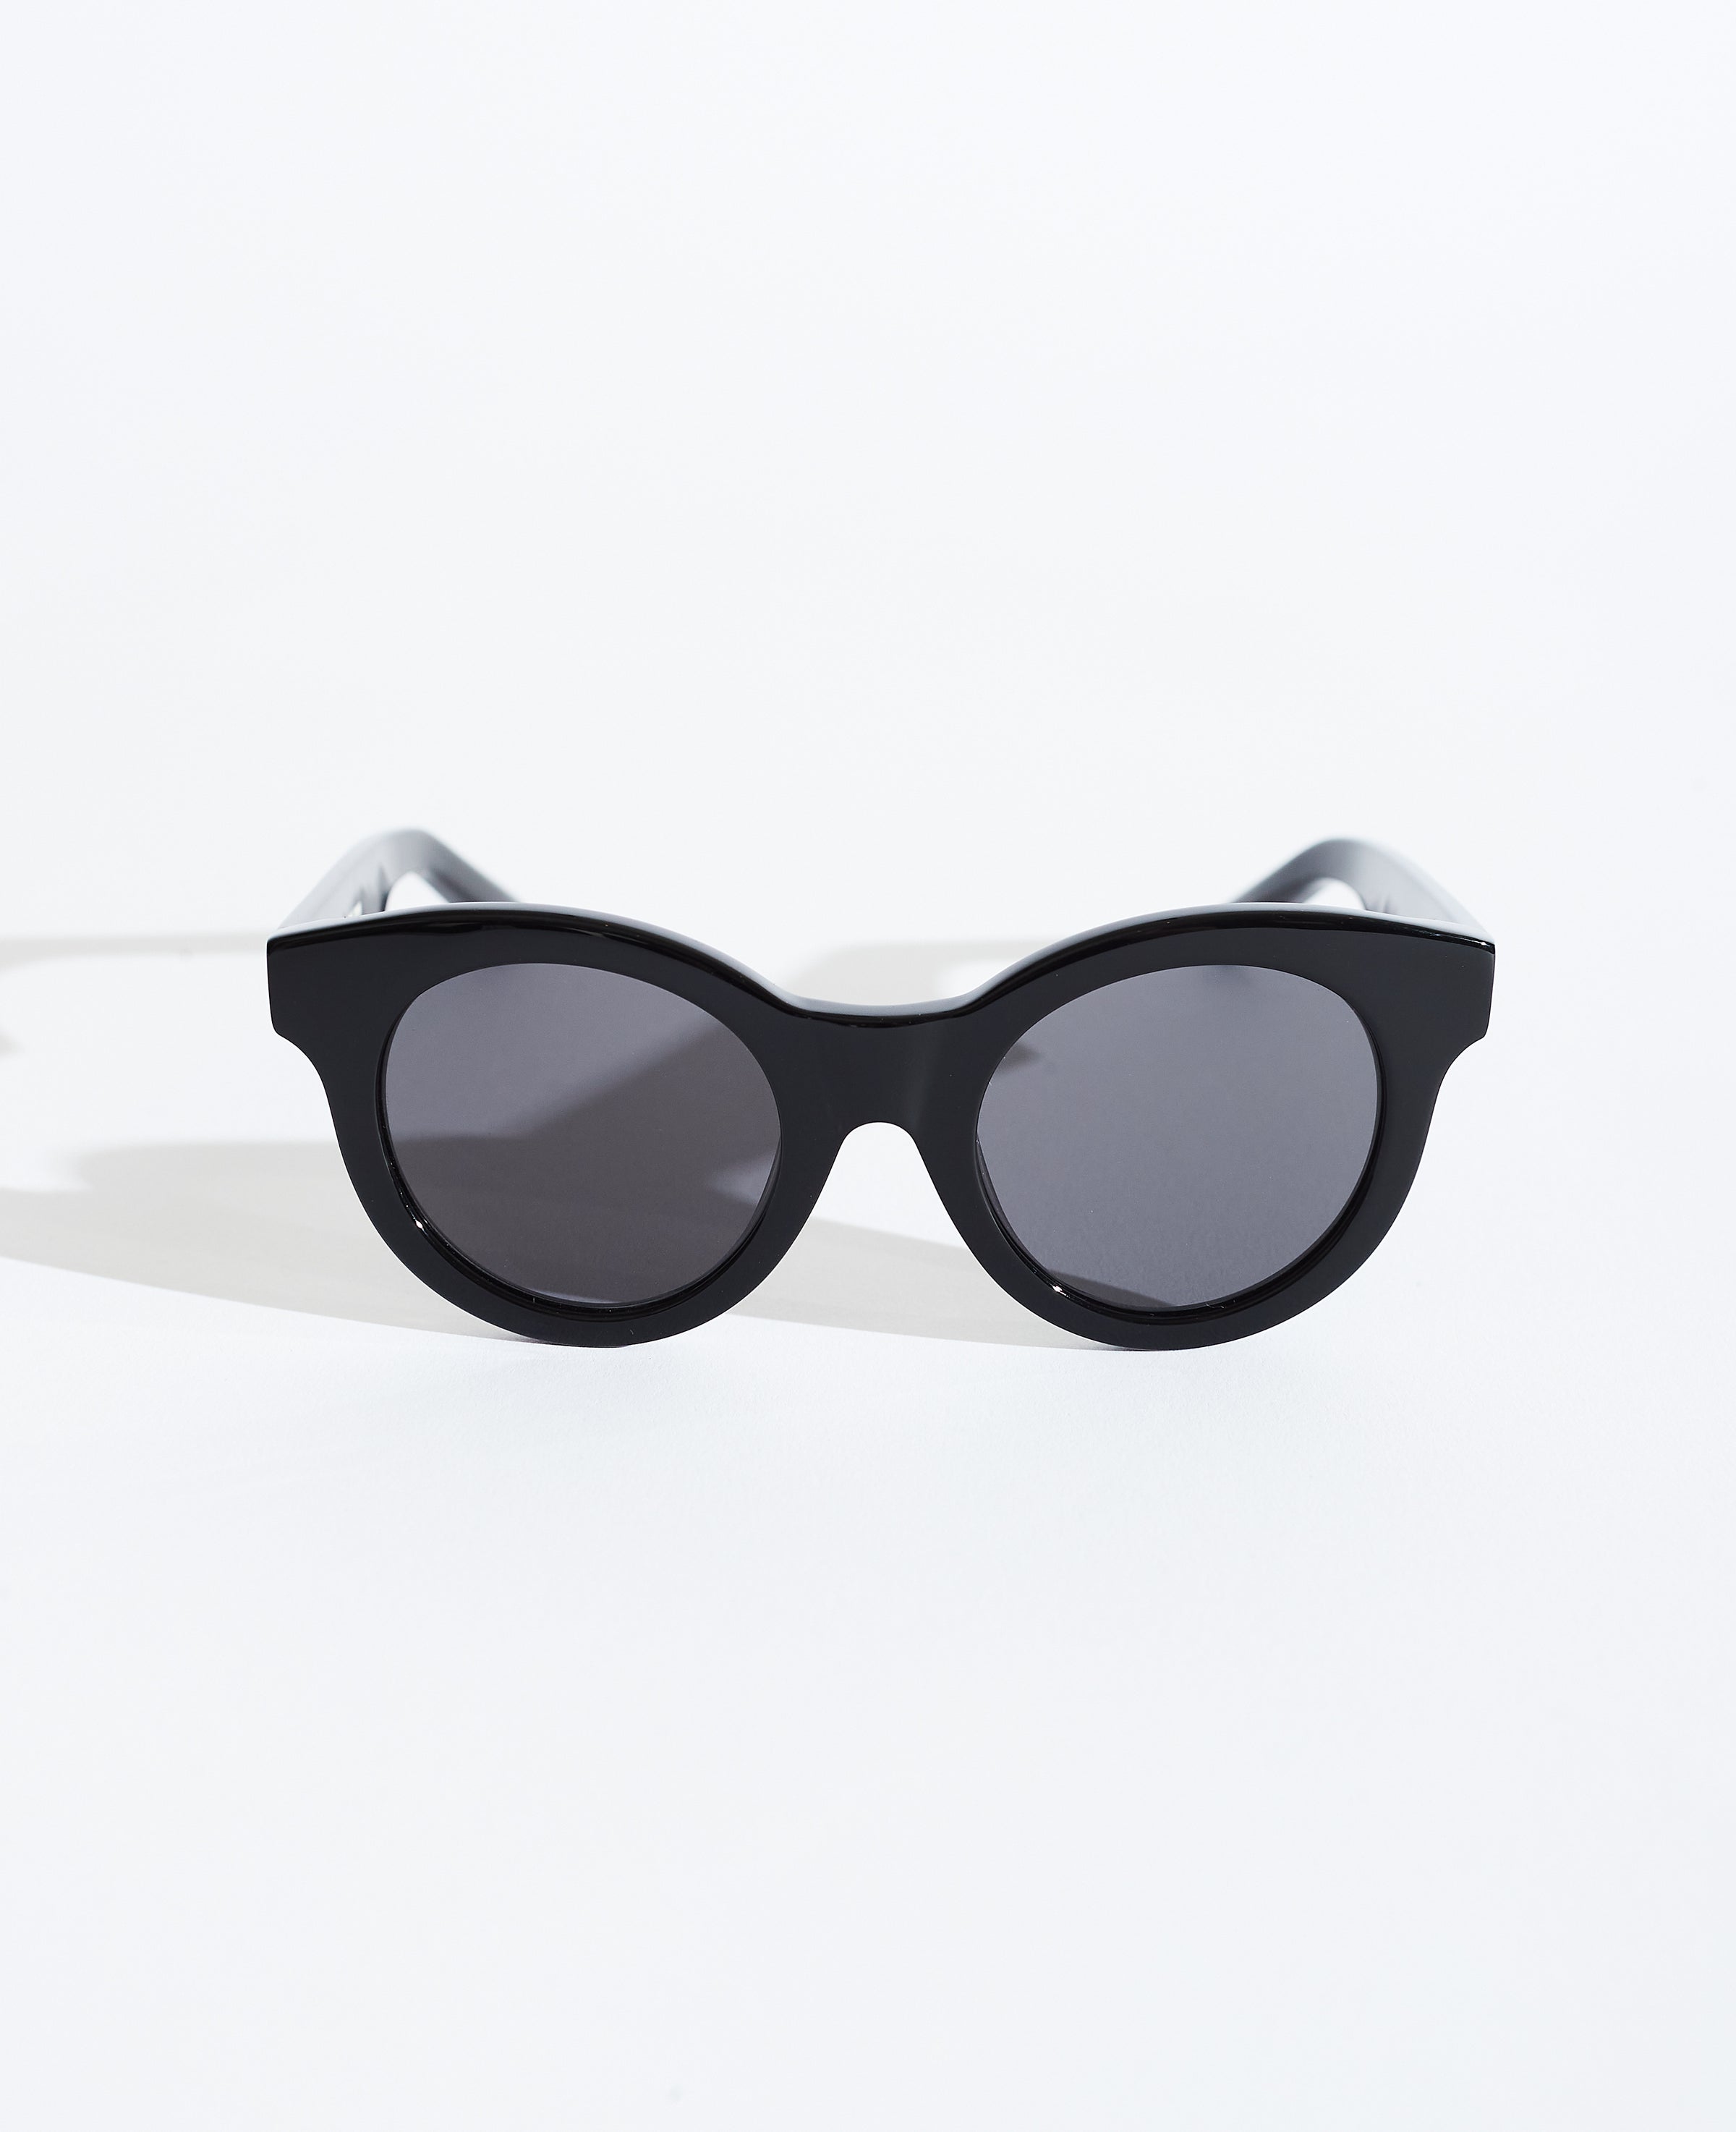 Otis Black Cat Eye Sunglasses - The Horse x Local Supply by The Horse®